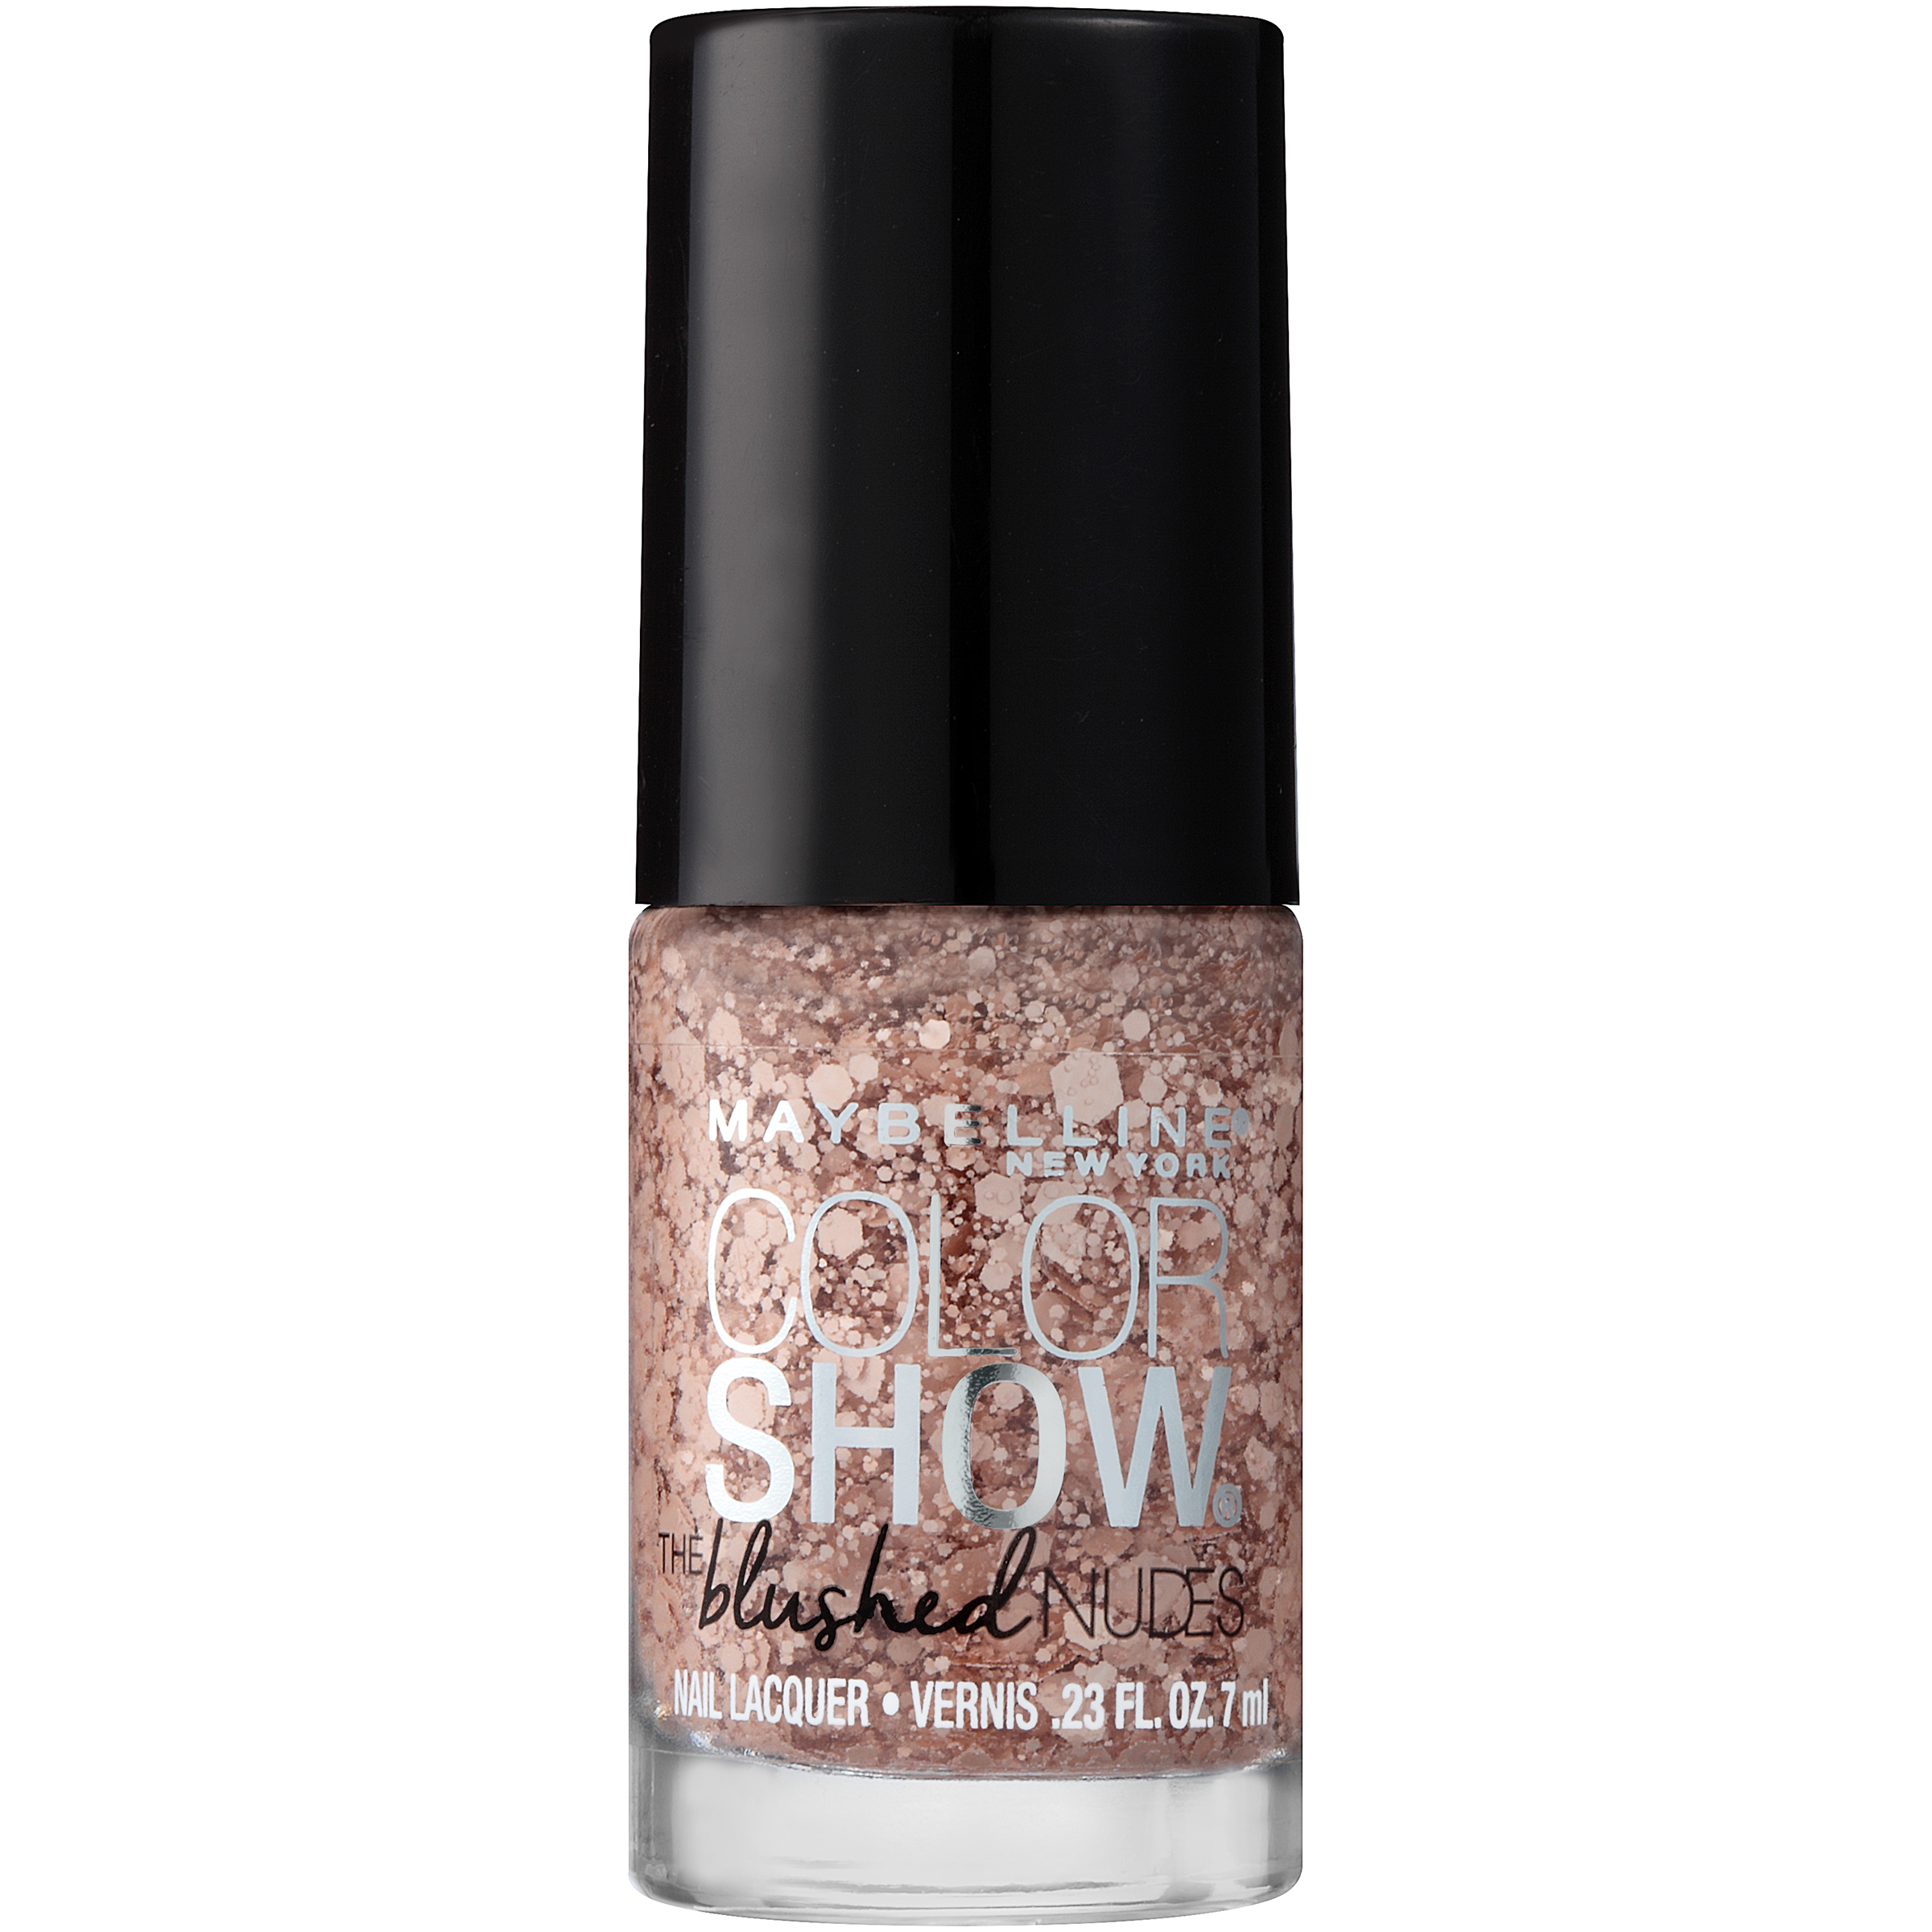 Maybelline New York Color Show Blushed Nudes Nail Lacquer